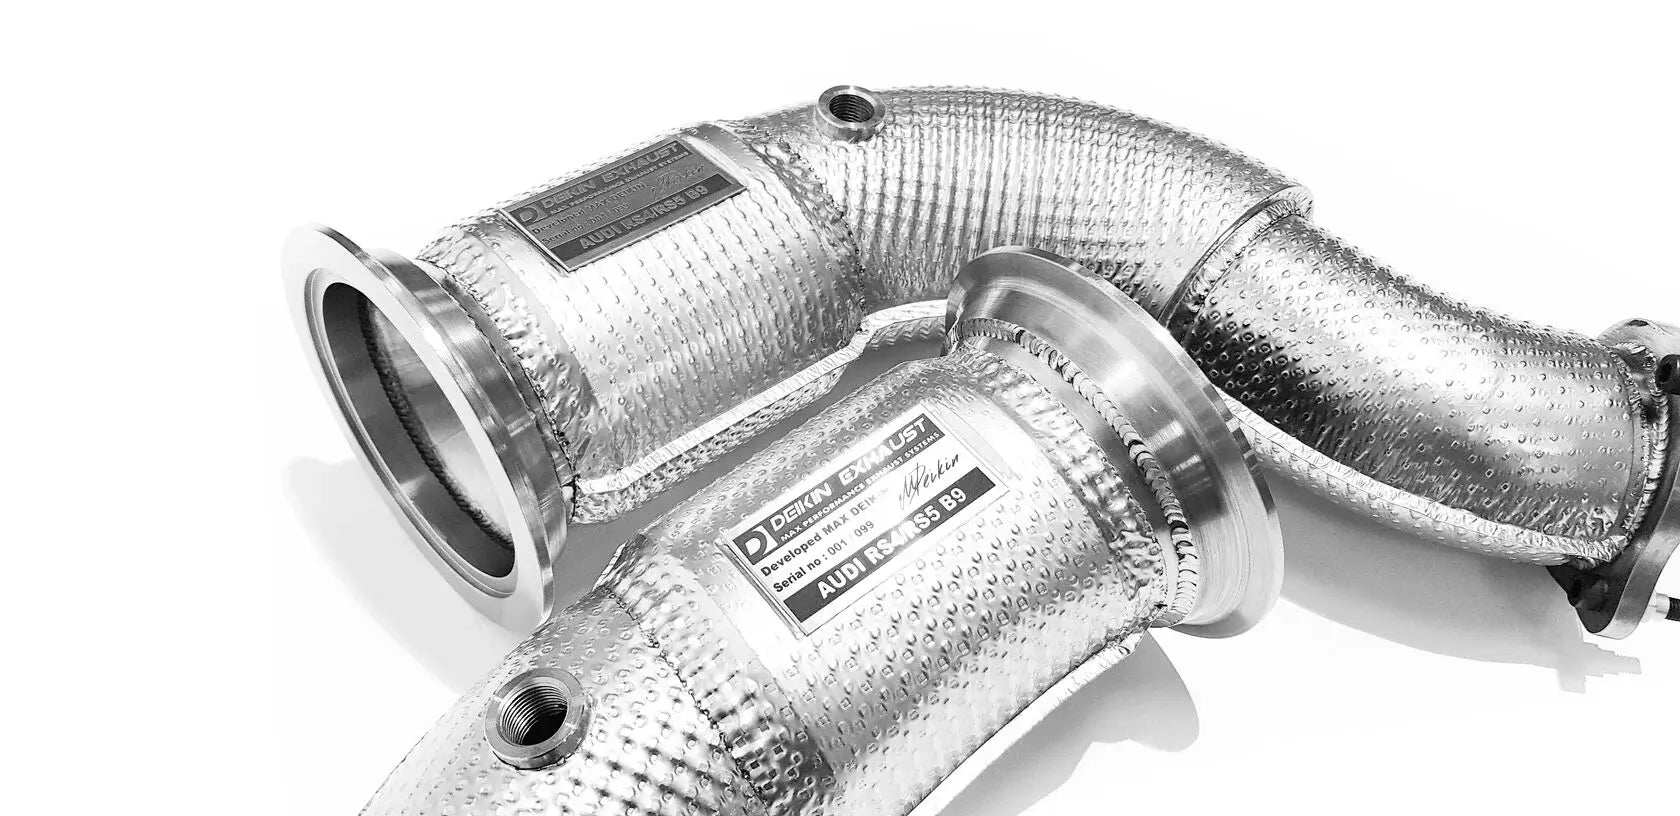 DEIKIN 10-AUDI.RS5.B9-DPT Downpipe for AUDI RS5 (B9) with thermal insulation HeatShield Photo-1 